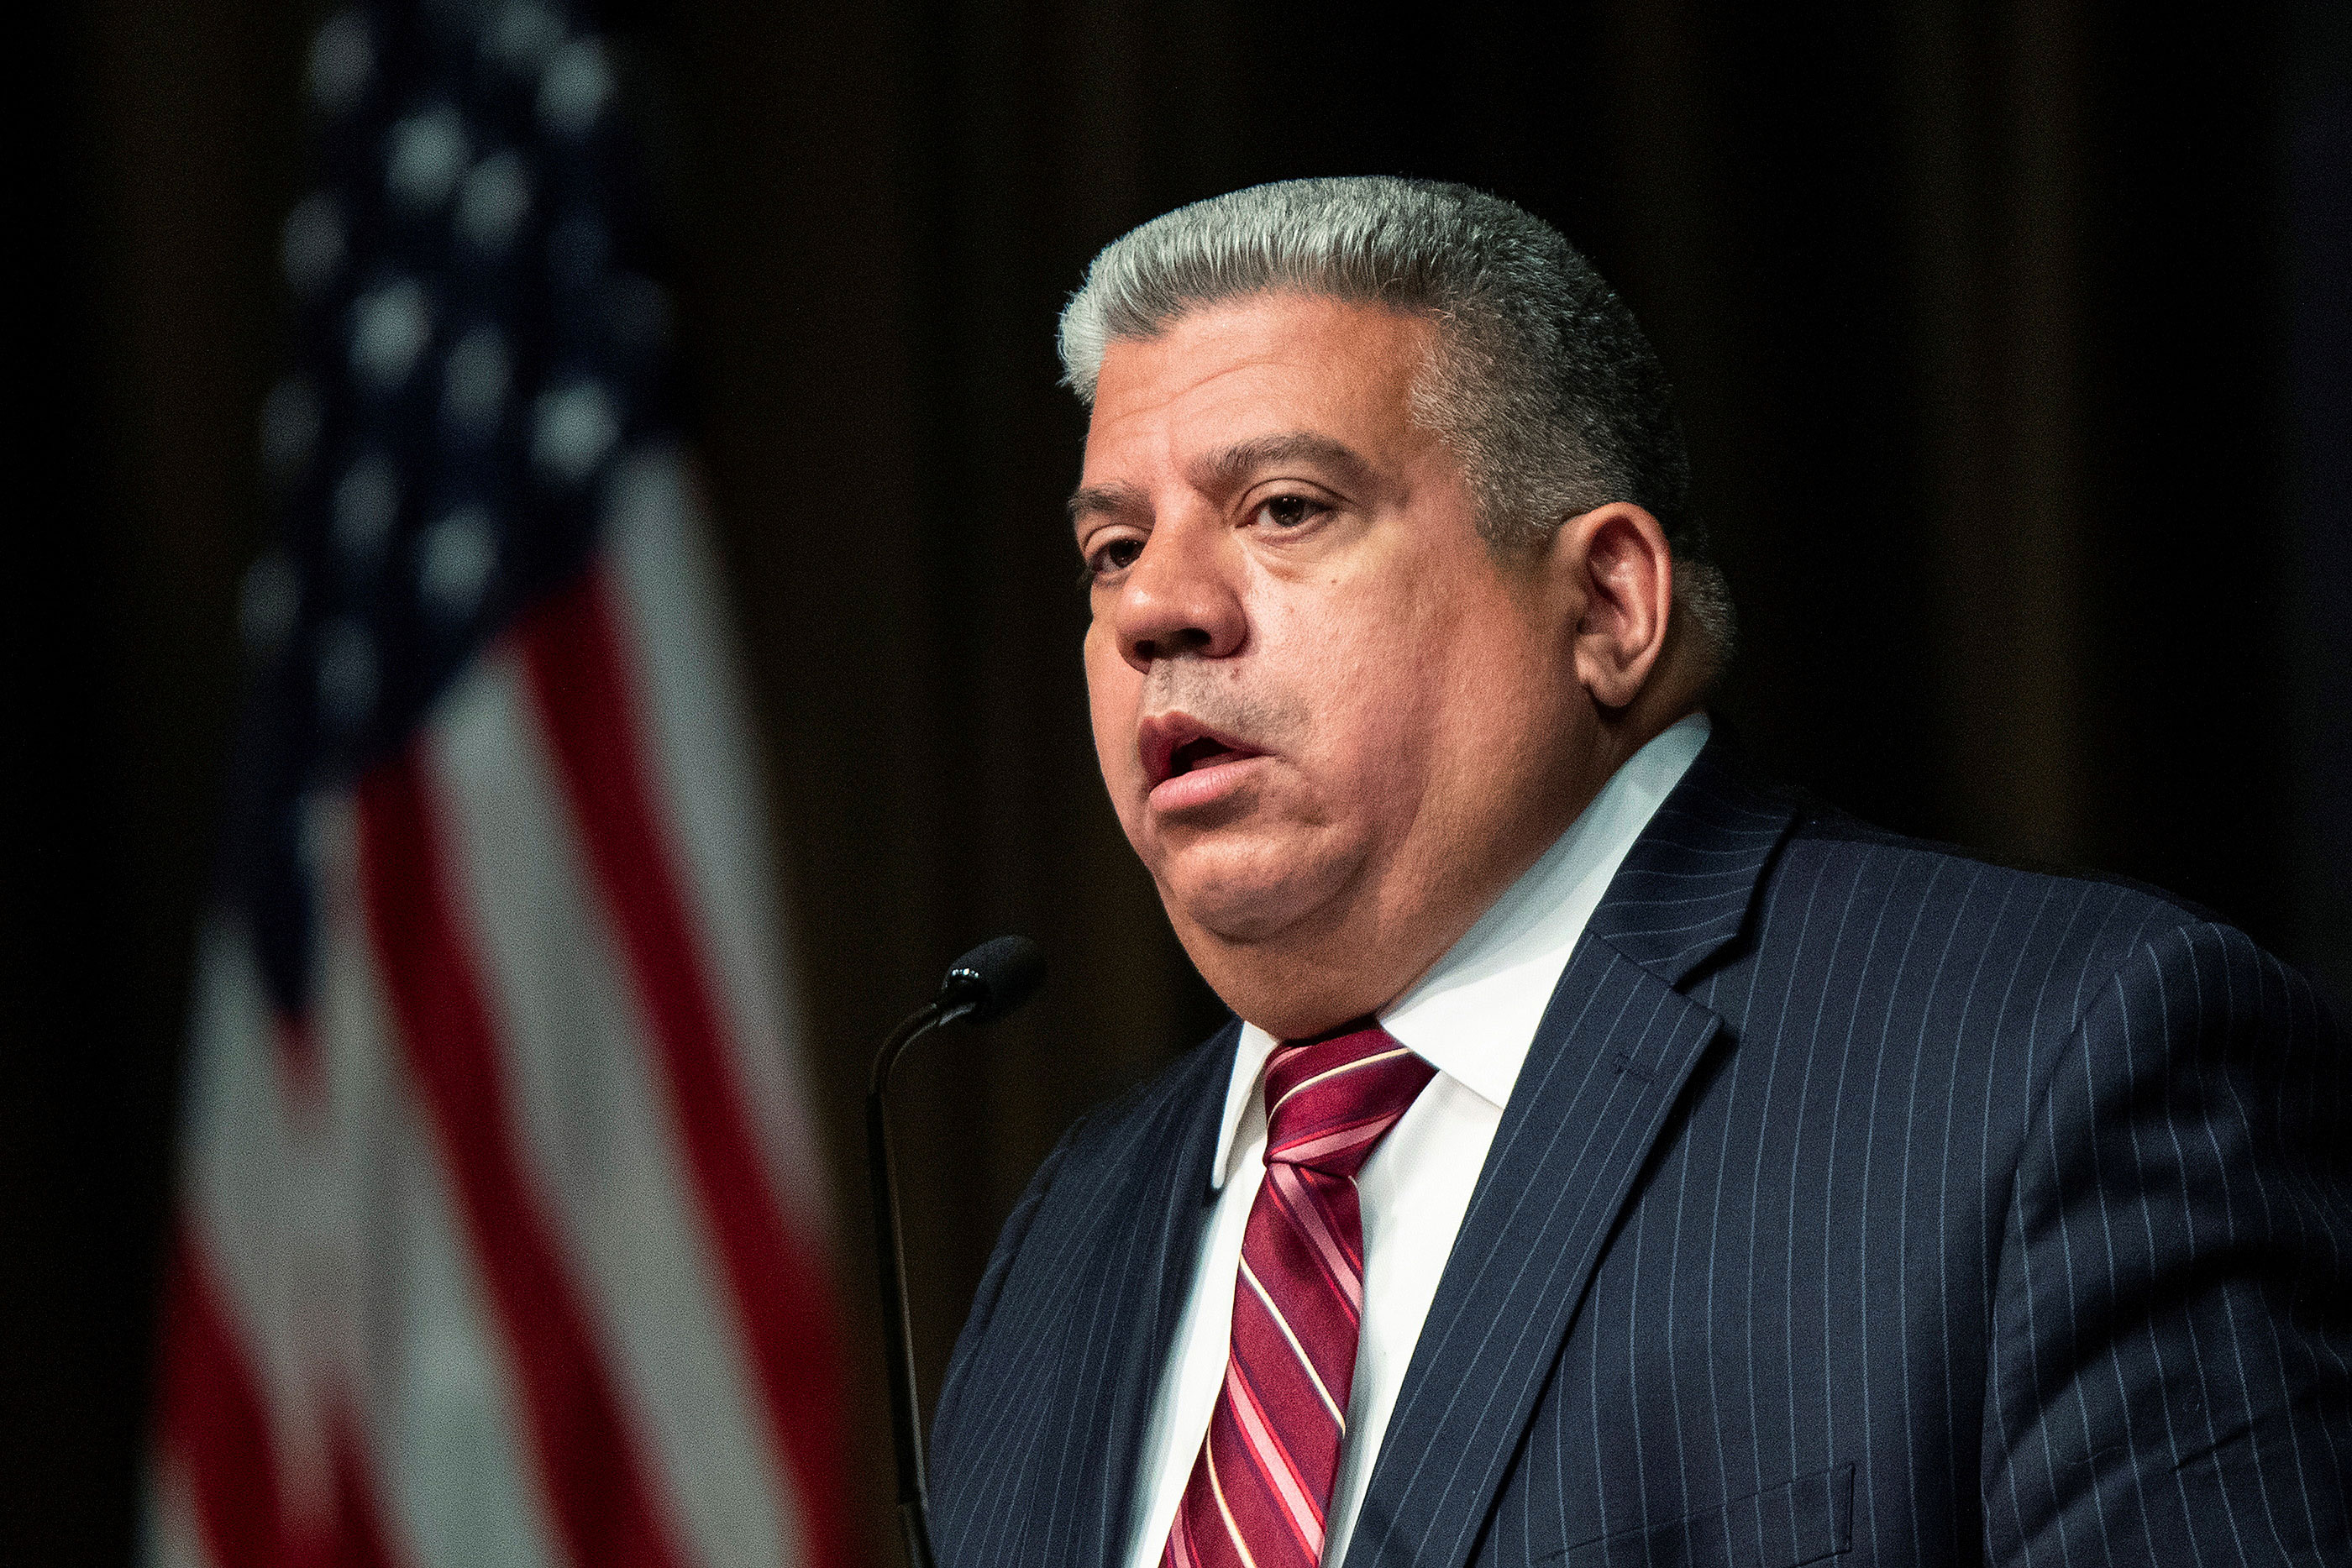 Brooklyn District Attorney Eric Gonzalez speaks during the National Action Network National Convention in New York on April 7.